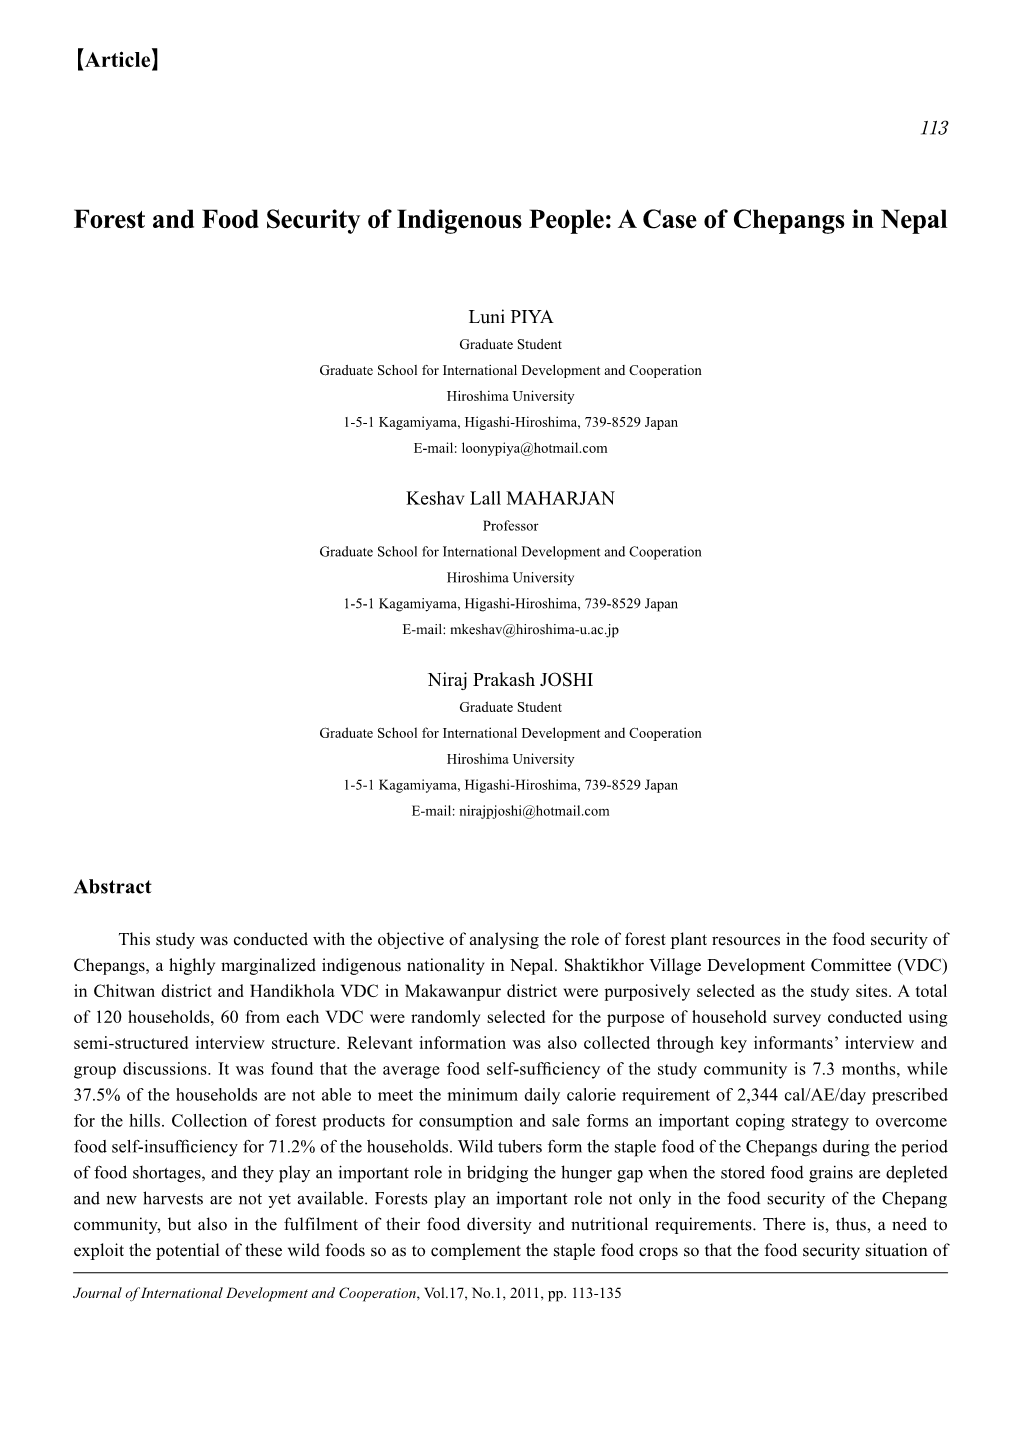 Forest and Food Security of Indigenous People: a Case of Chepangs in Nepal